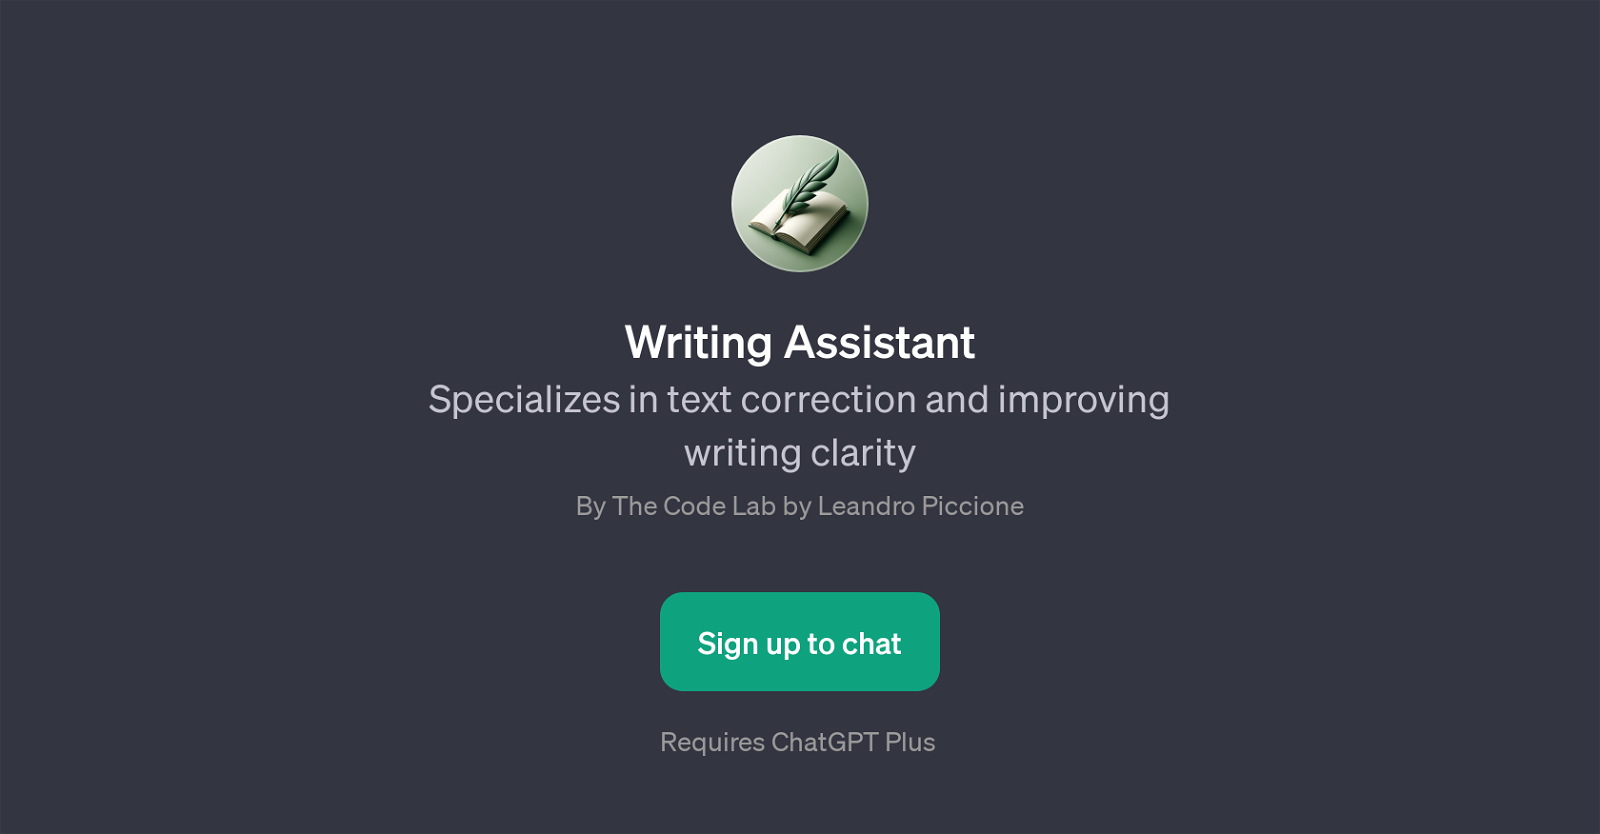 Writing Assistant website